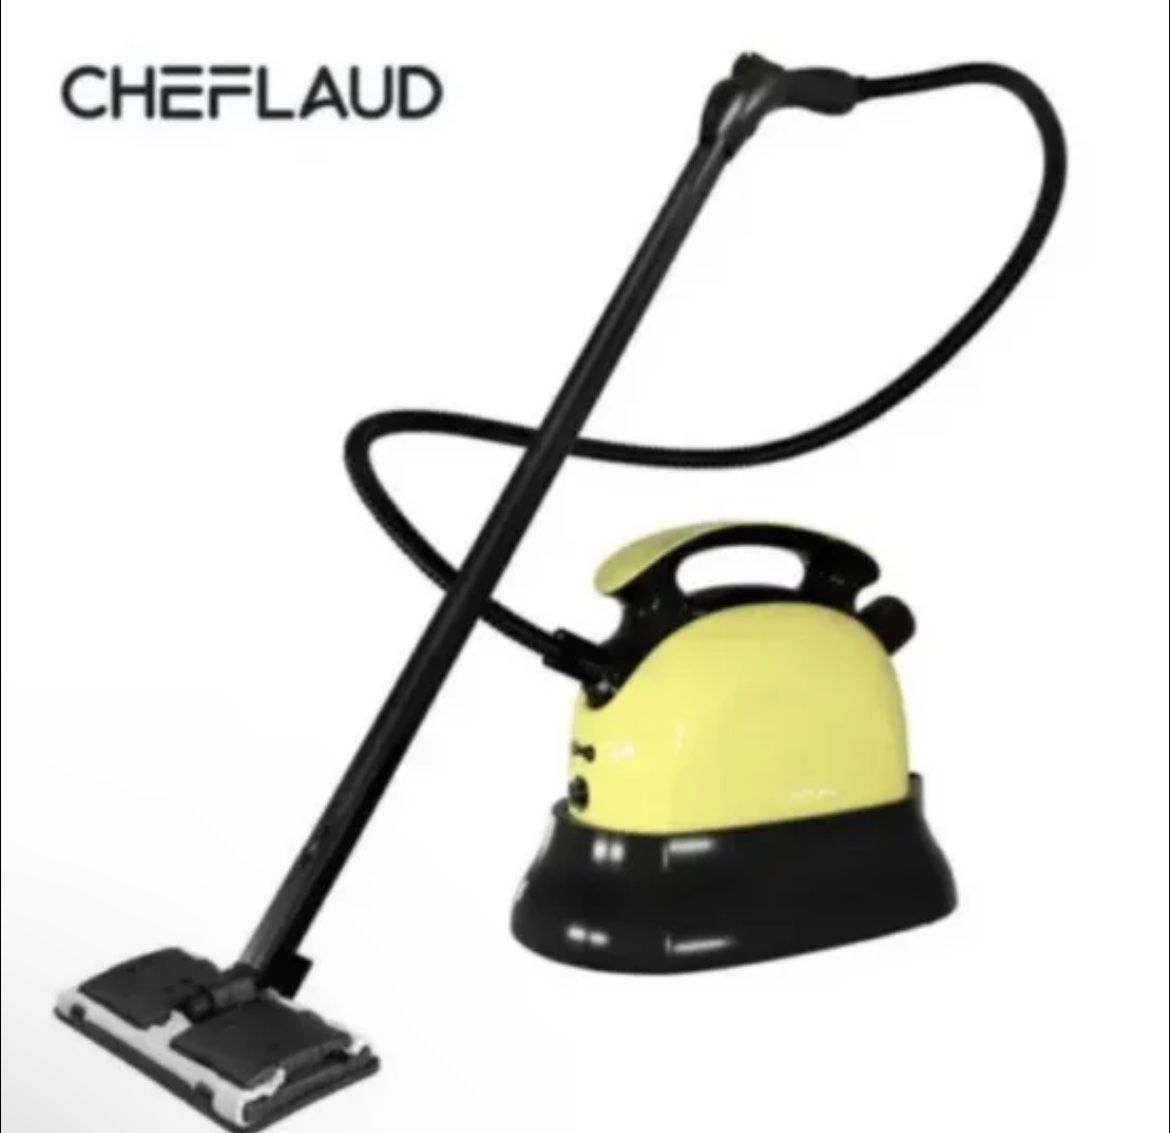 Cheflaud 1500W Multi-Purpose Steam Cleaner with 13 Accessories, CB-03A